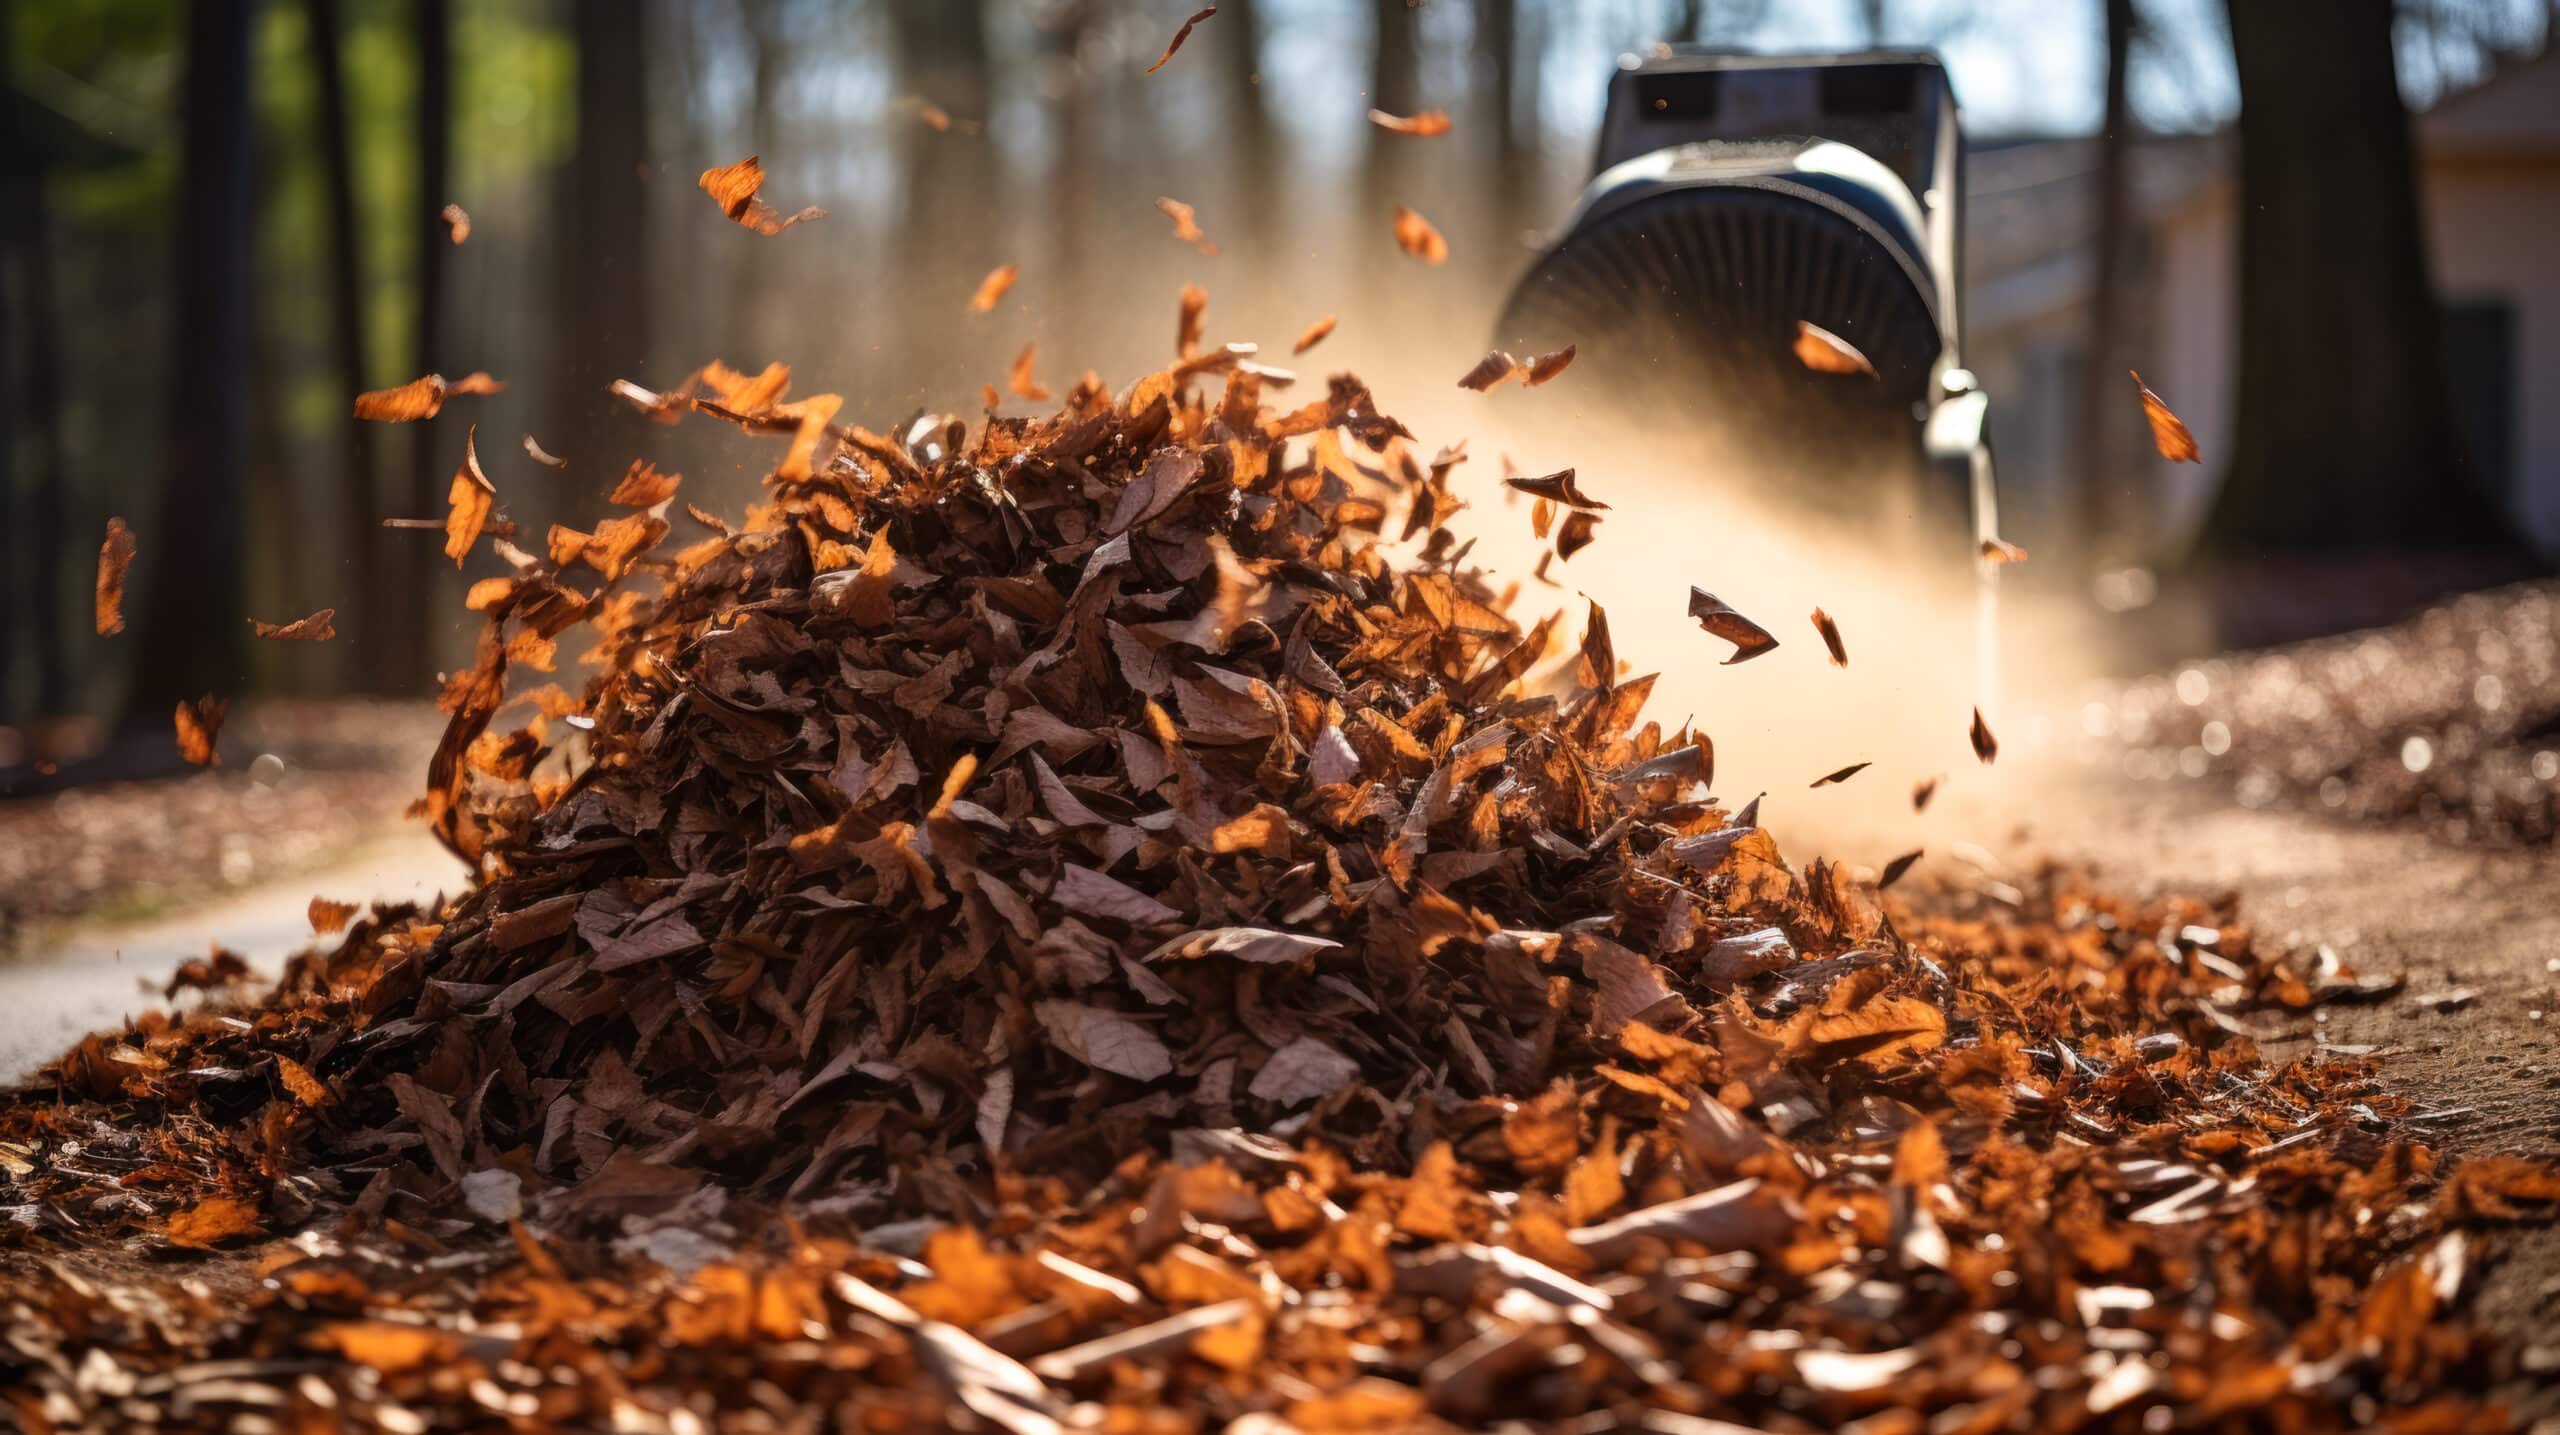 www.appr.com : Are electric leaf blowers less noisy?